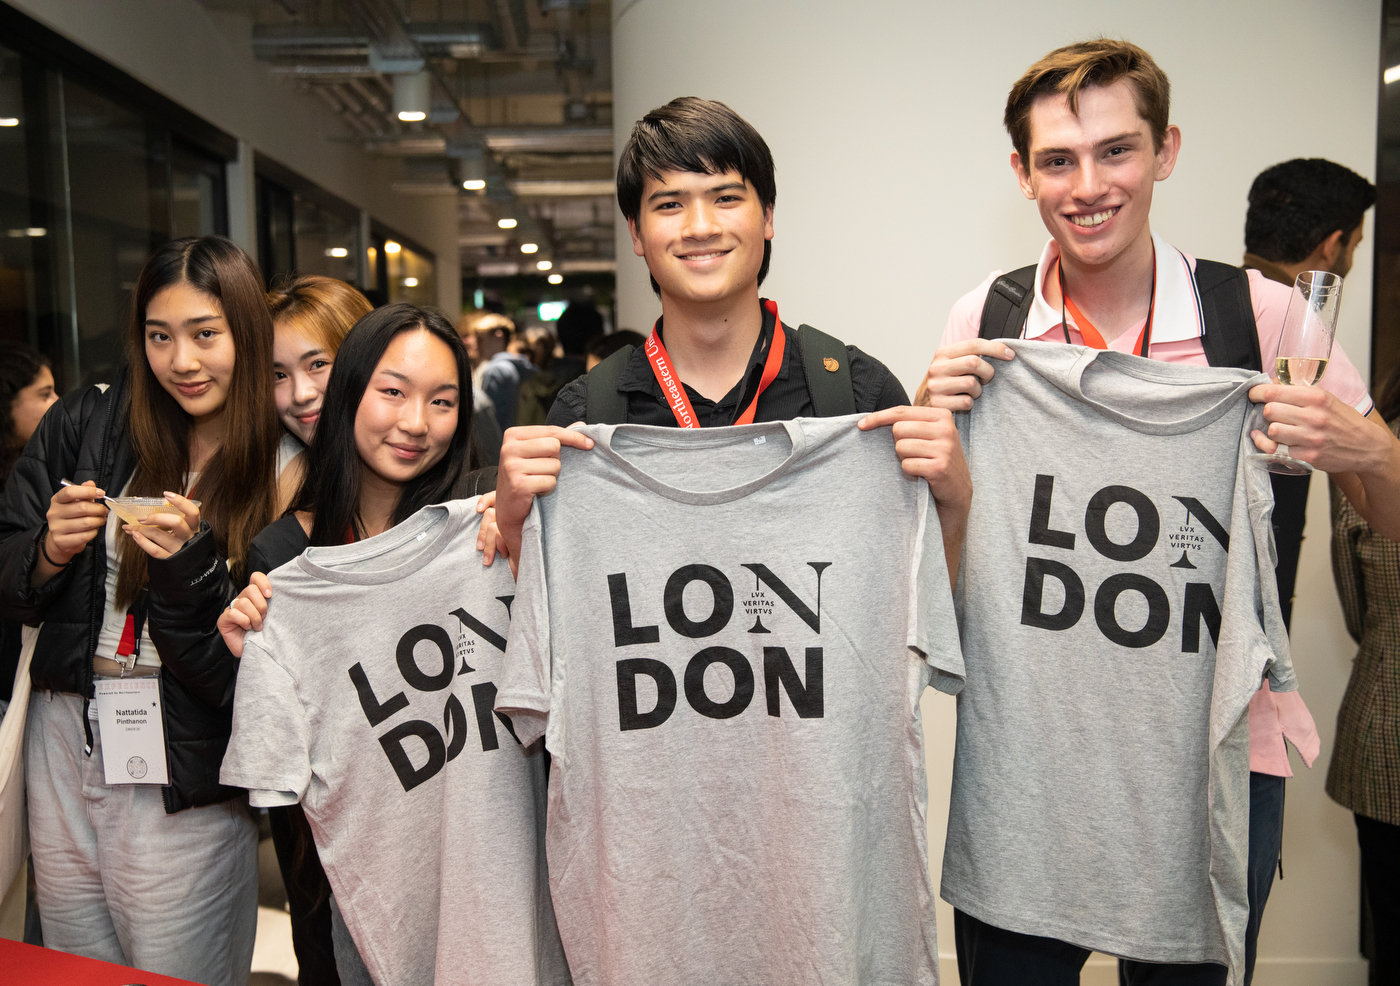 three people hold up t-shirts that say London on them